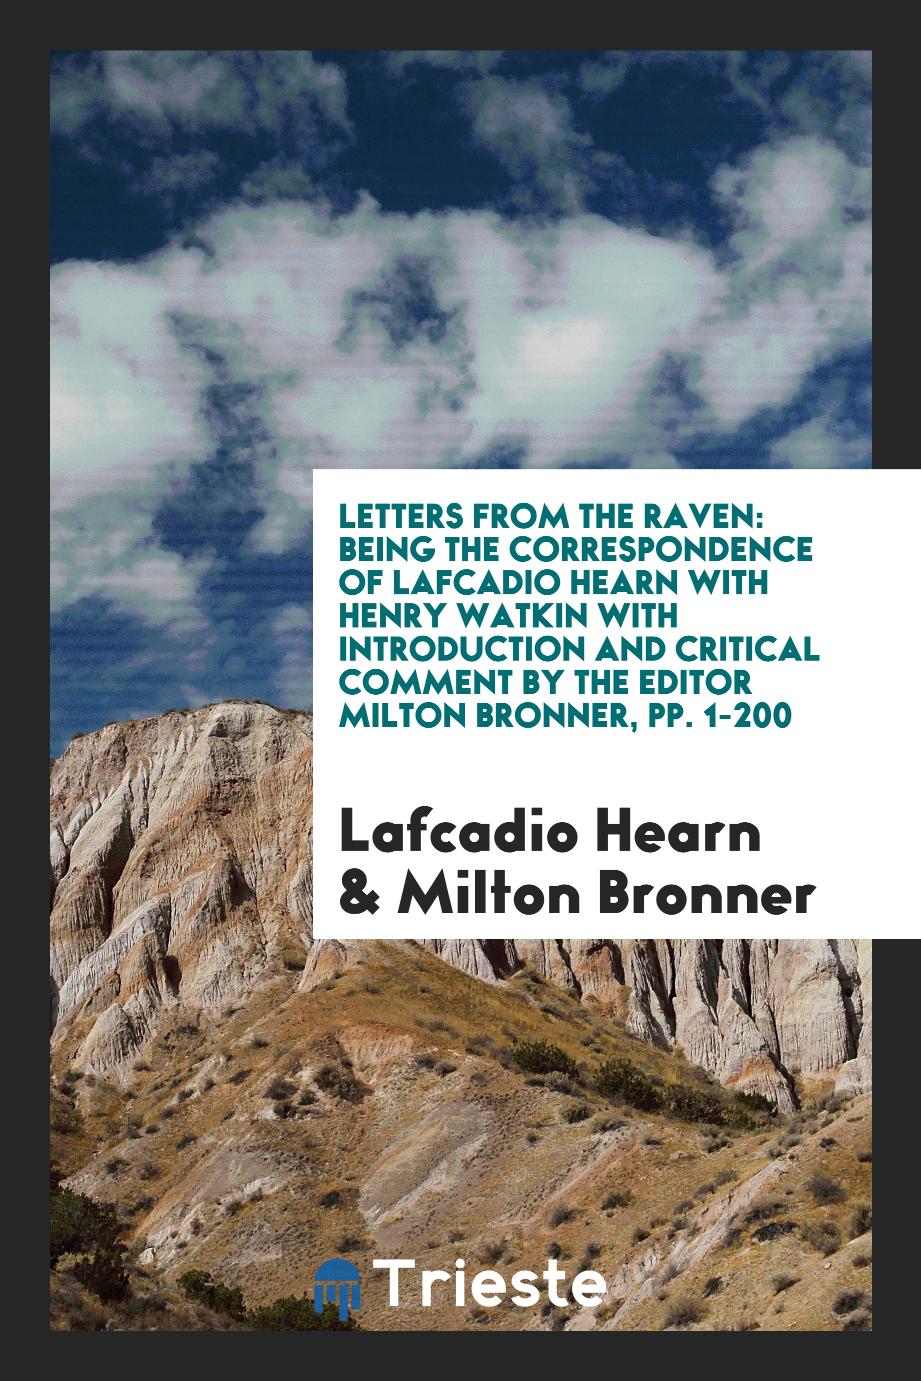 Letters from the Raven: Being the Correspondence of Lafcadio Hearn with Henry Watkin with Introduction and Critical Comment by the Editor Milton Bronner, pp. 1-200